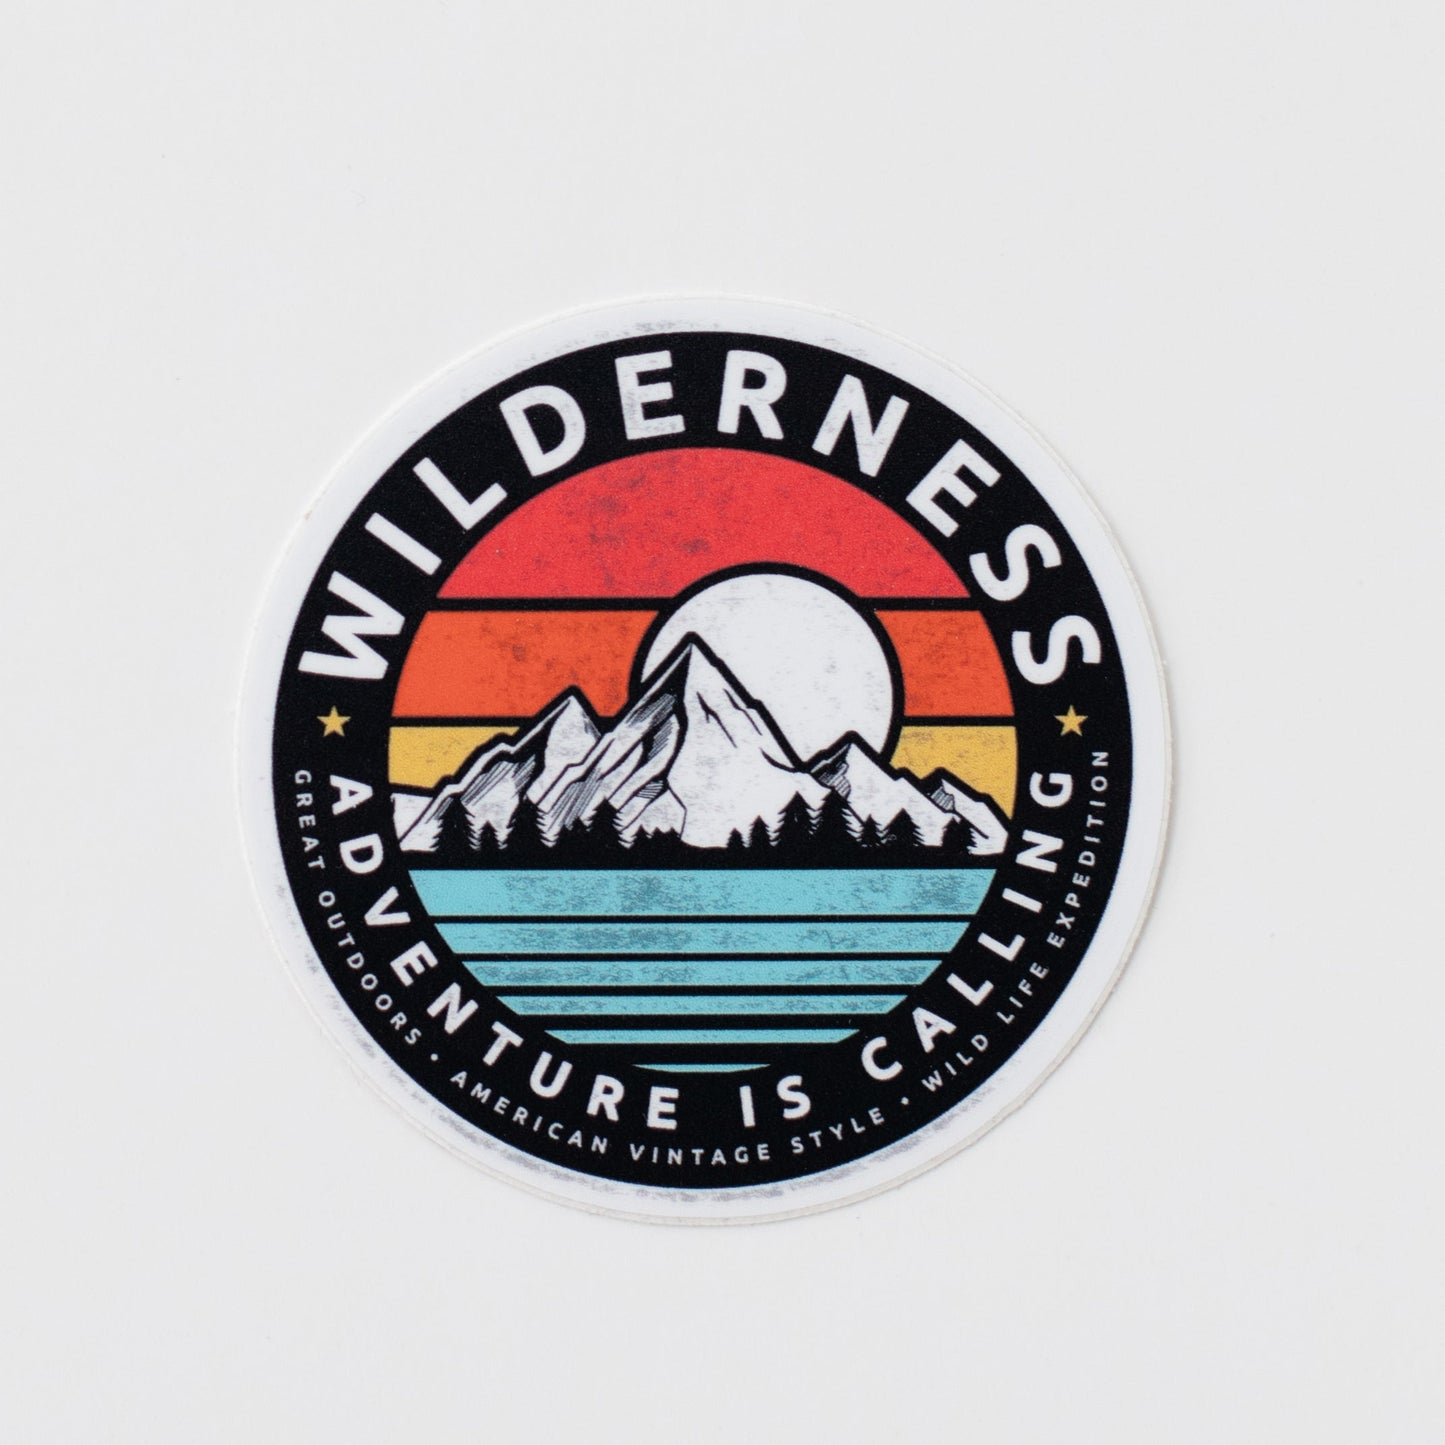 A circular, vinyl sticker of a colorful mountain landscape in front of a white background